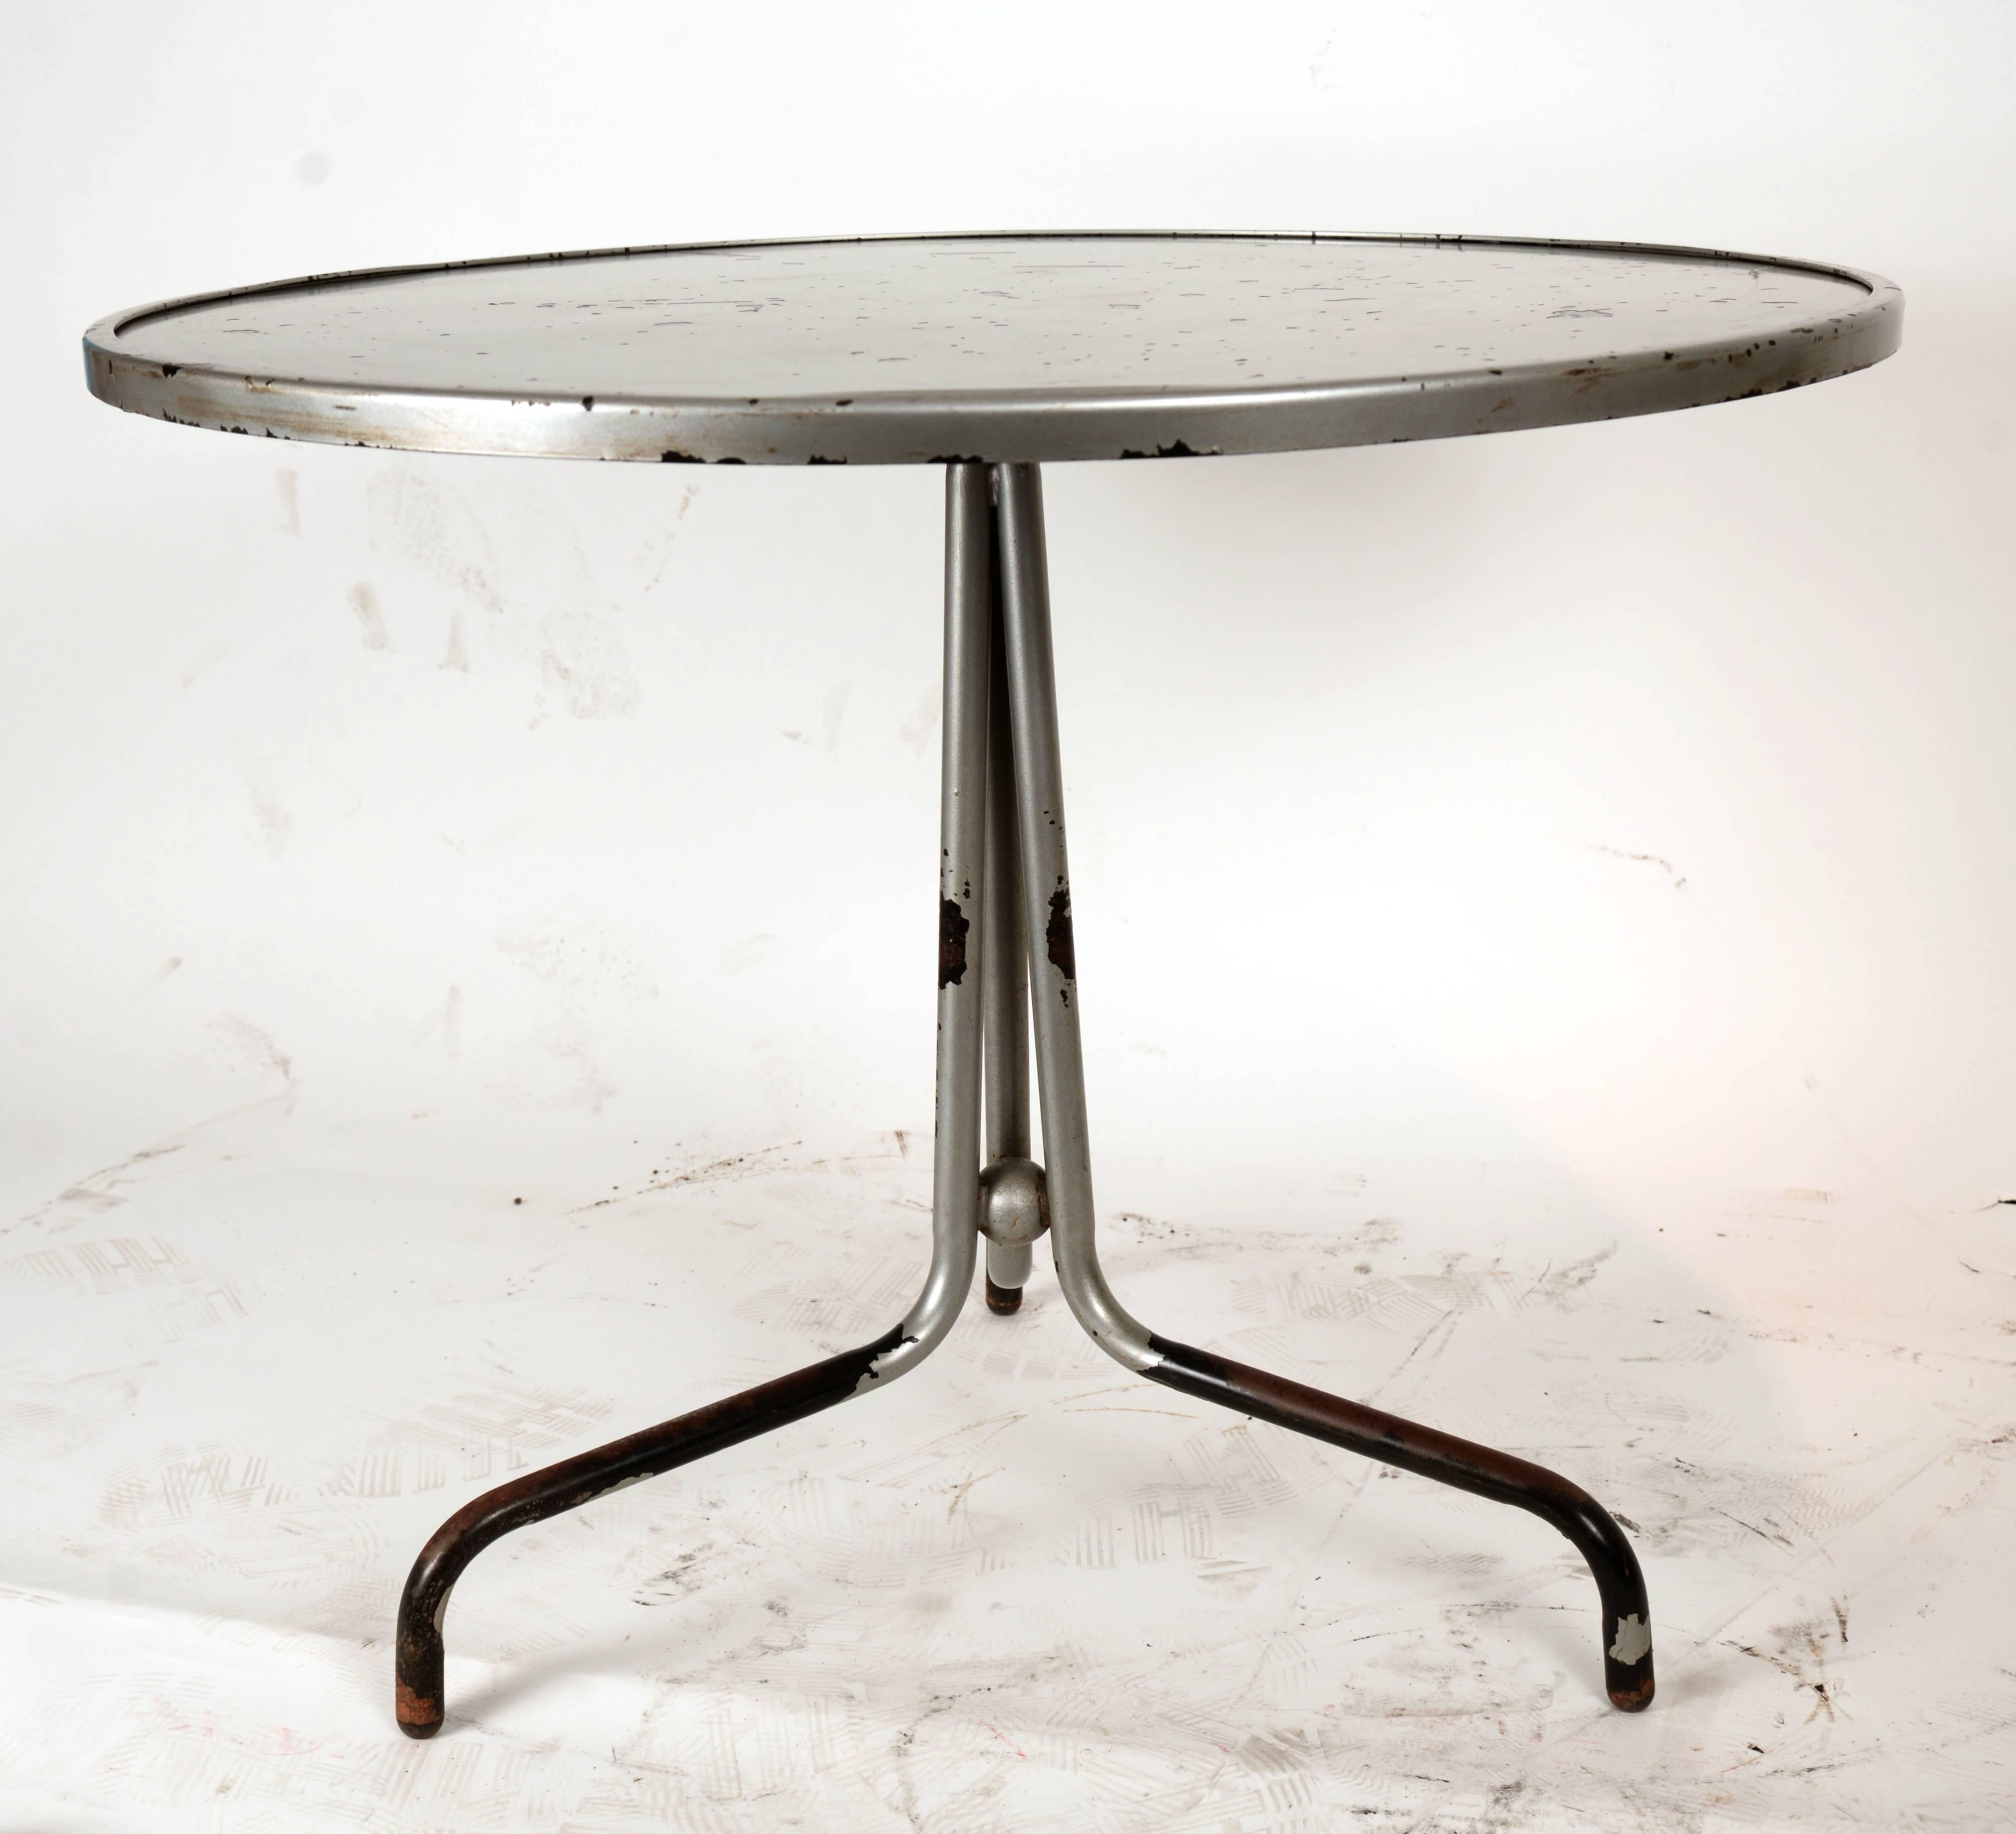 Steel round French side table with distressed silver over-paint.